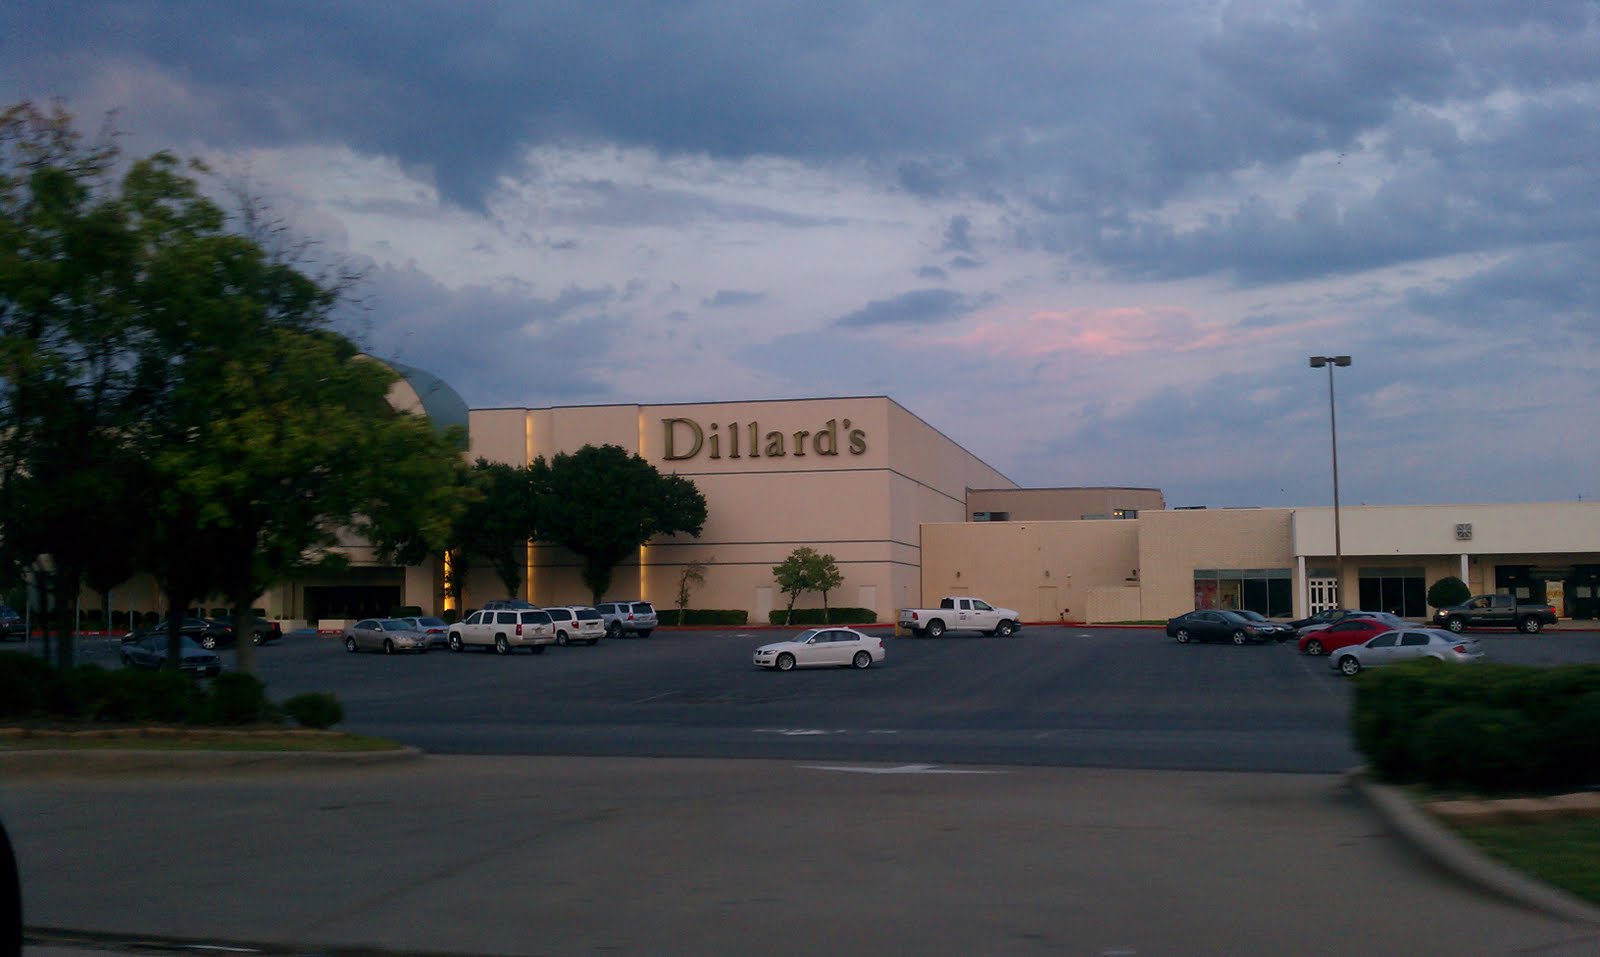 The Dillard's wing of the mall and entrance.